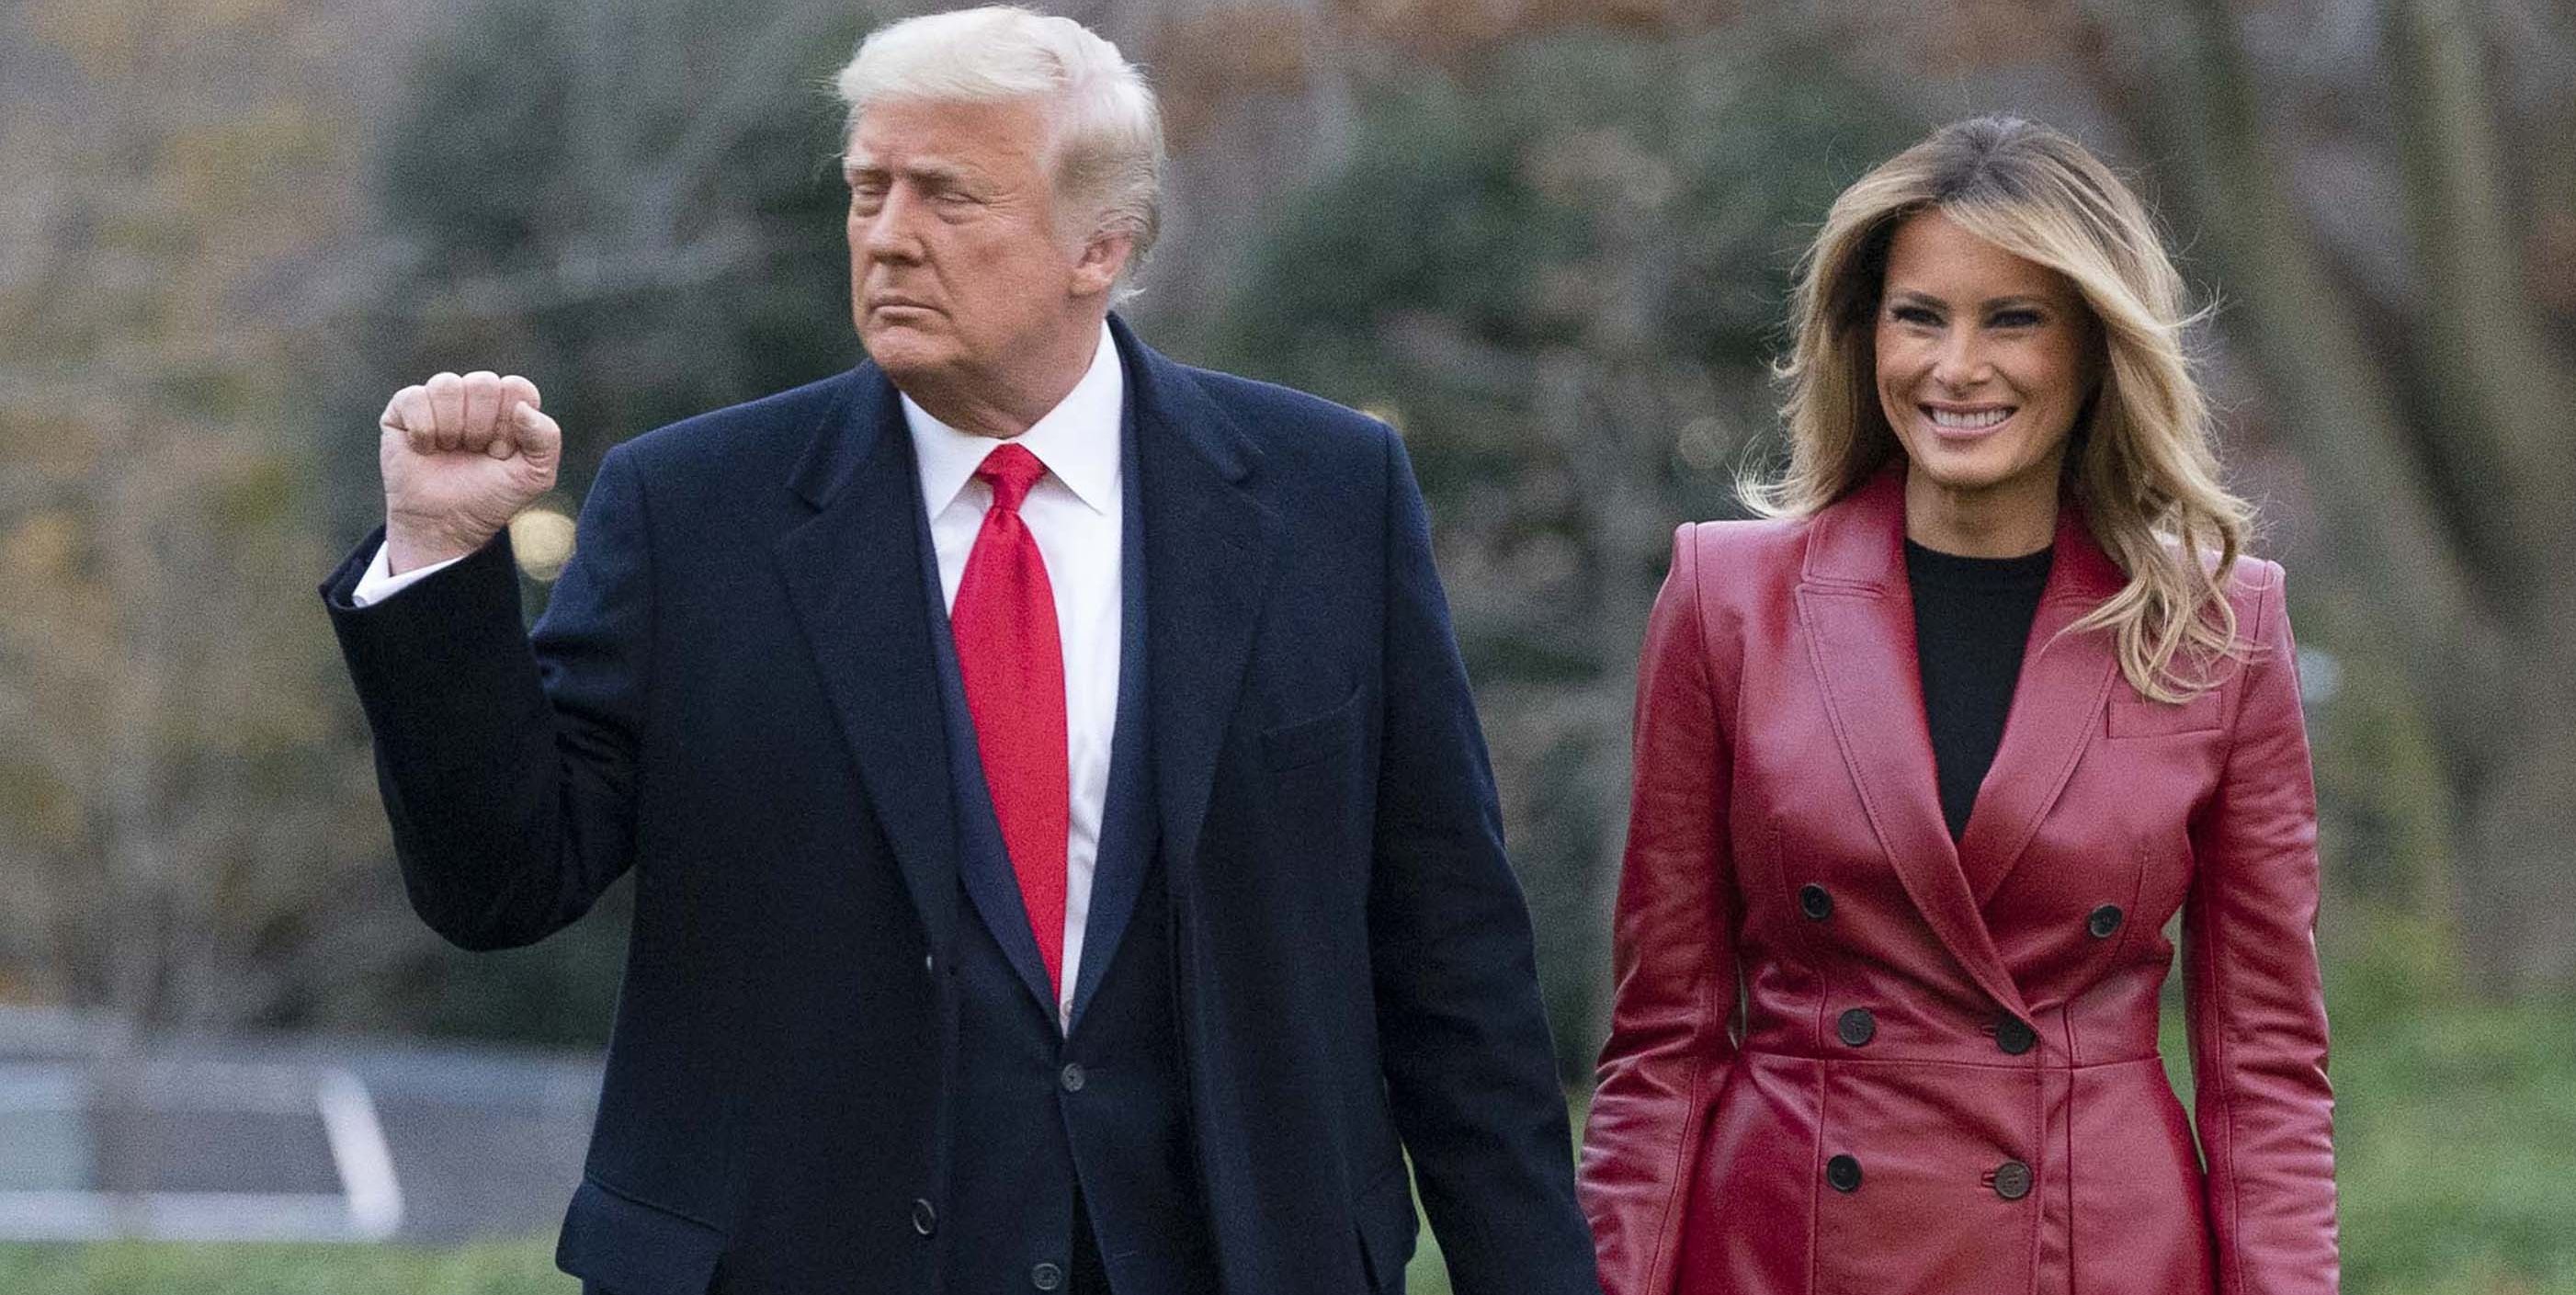 Melania Revised Her Prenup With Donald Trump While Delaying Her White House Move In 2017